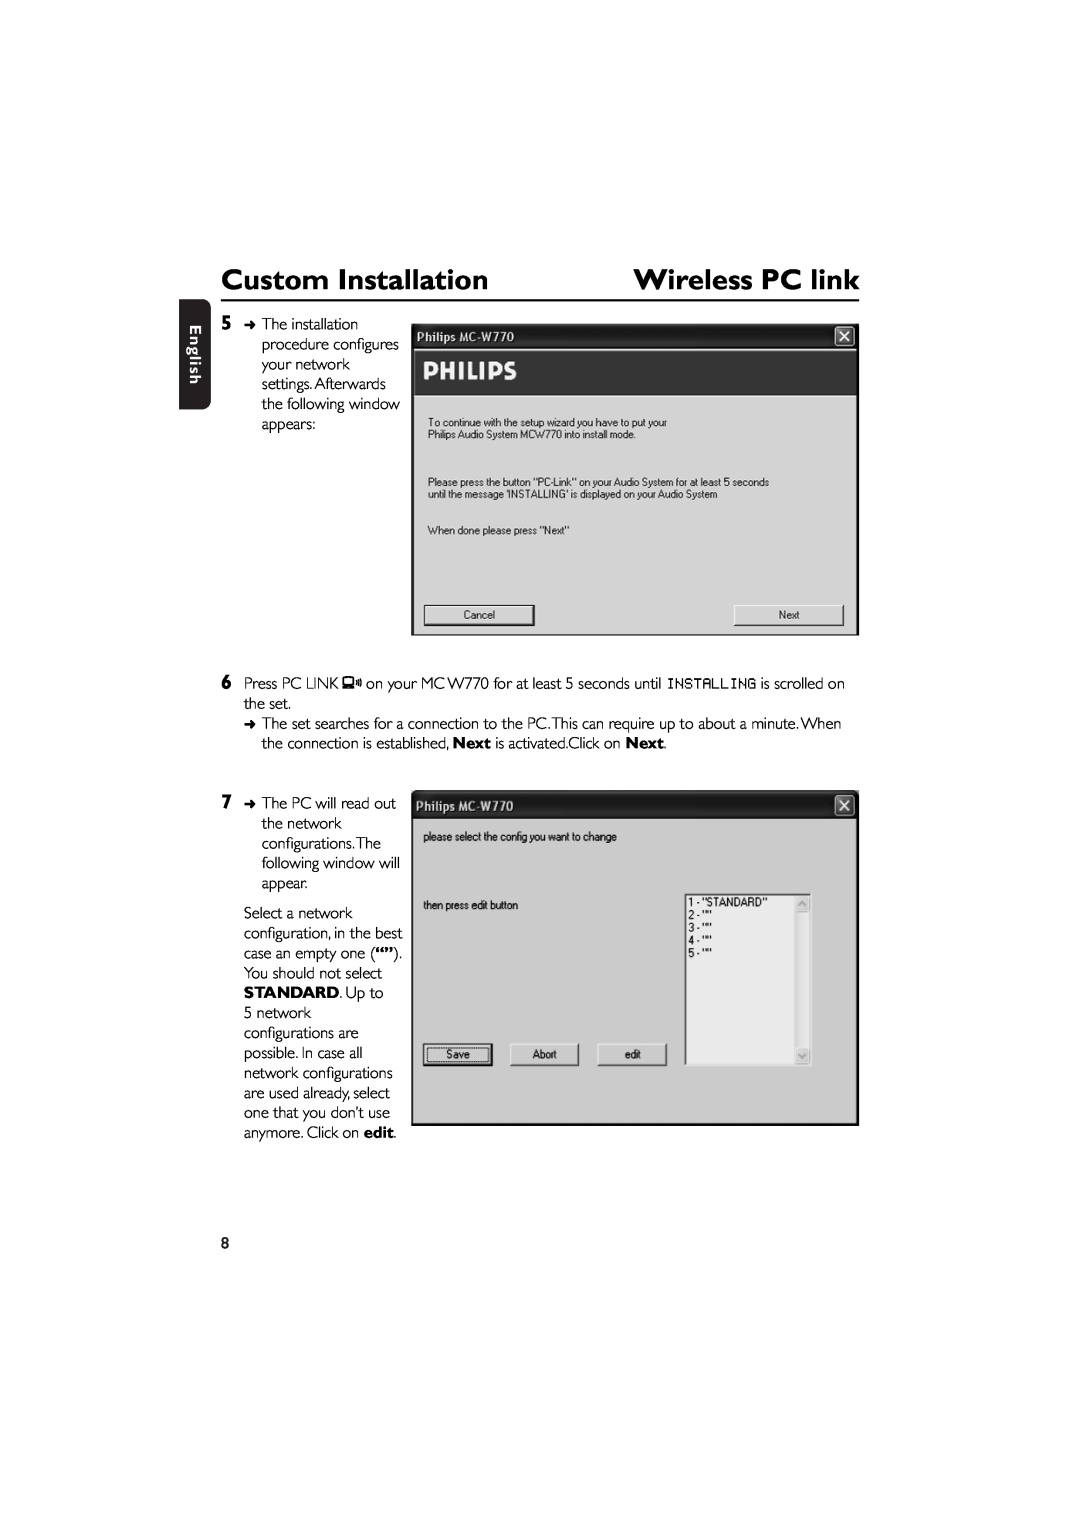 Philips MCW770 manual Custom Installation, Wireless PC link, English, The PC will read out 